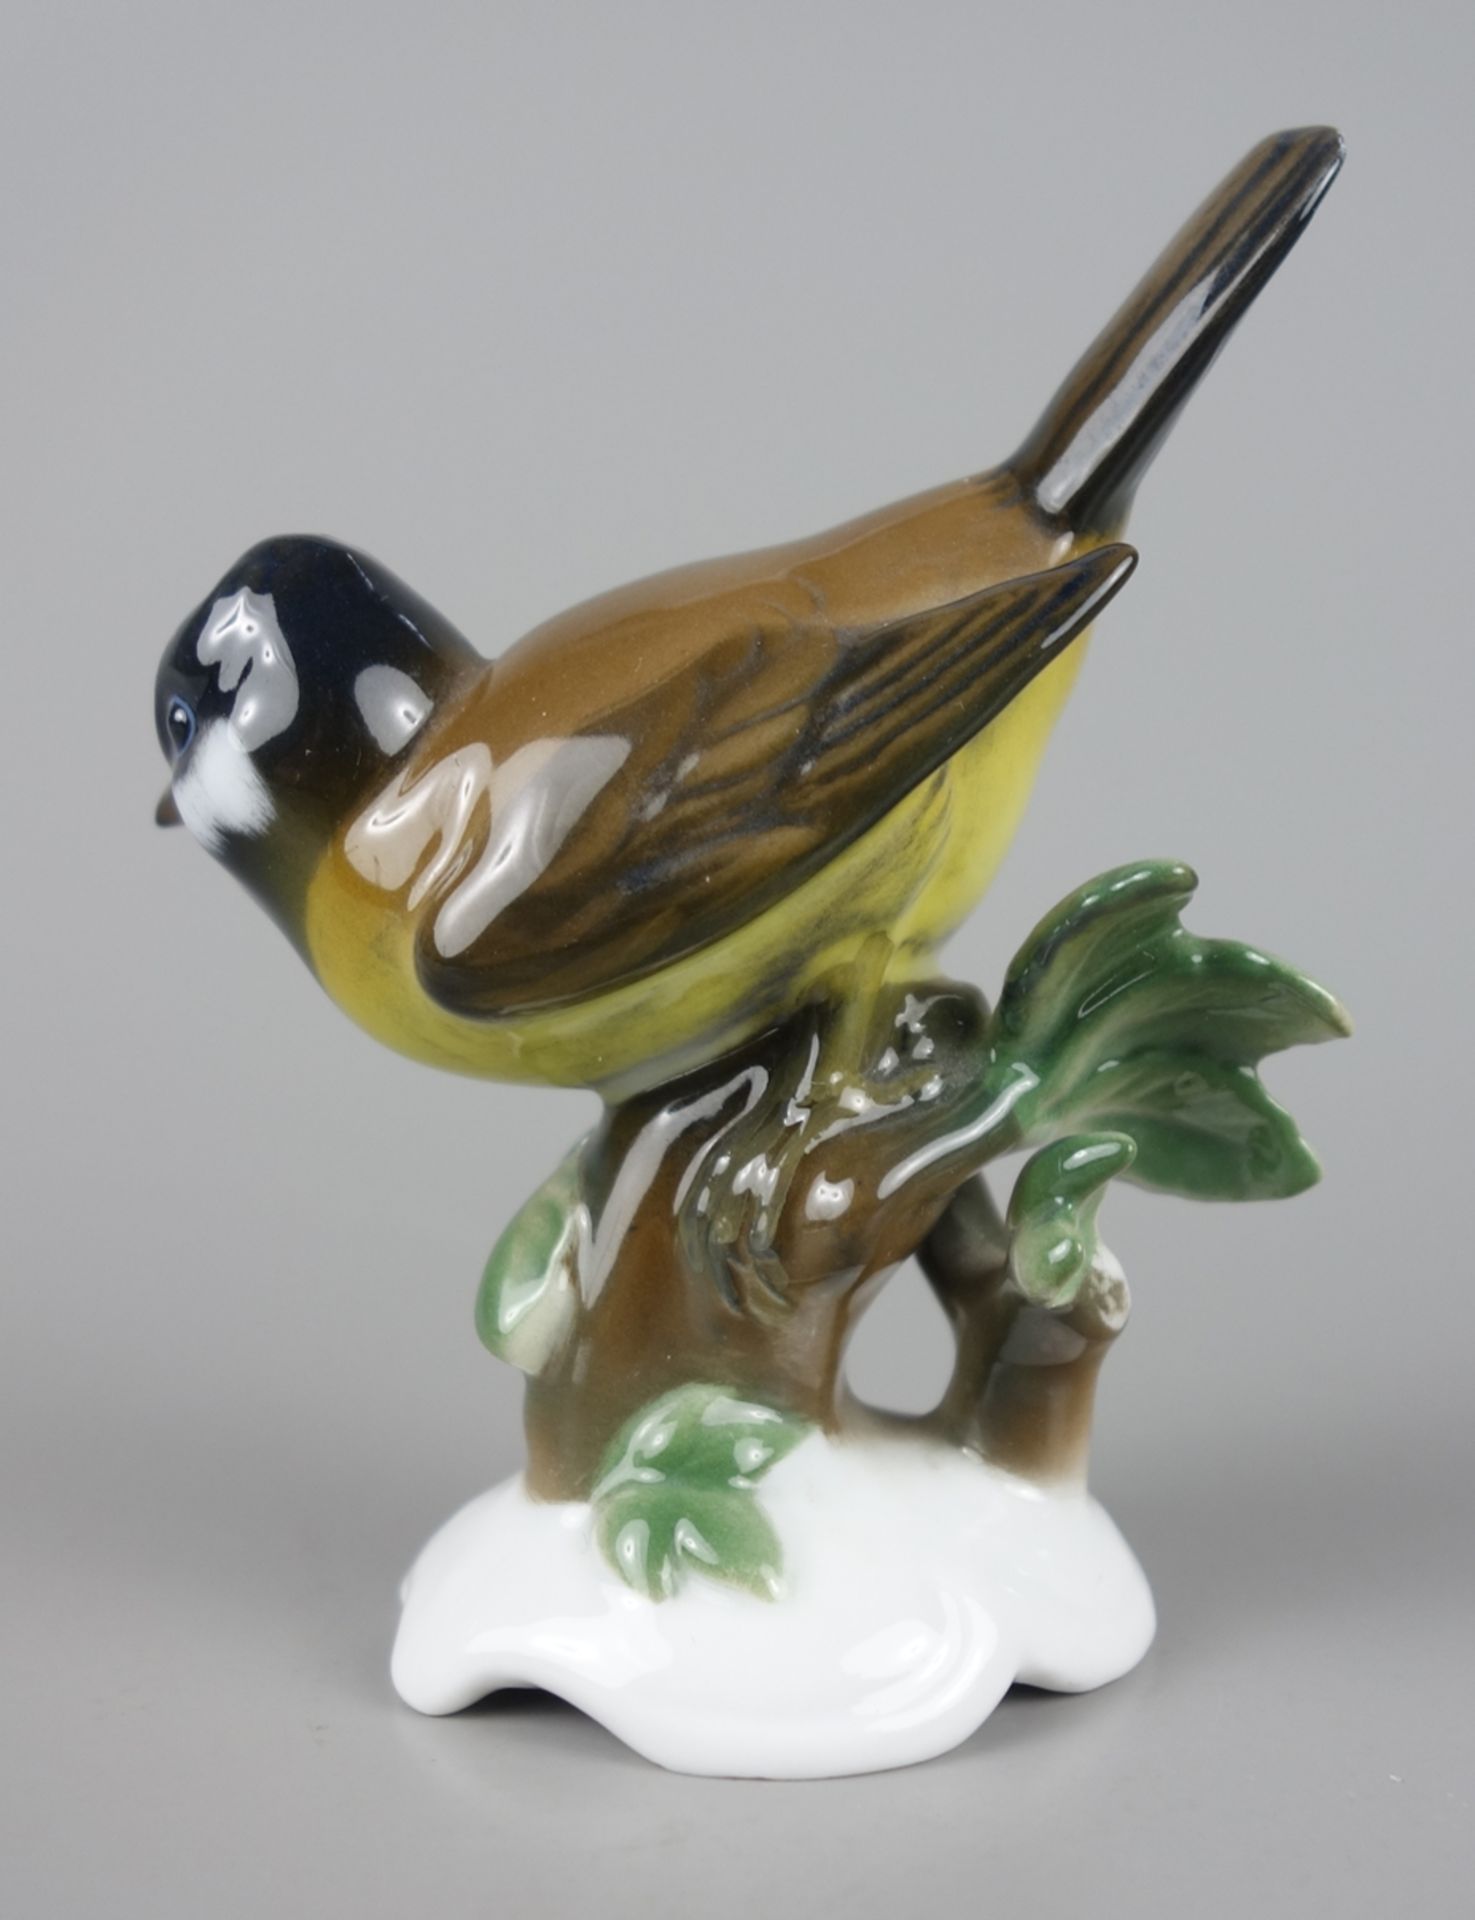 Blue tit on branch with leaves, Hugo Meisel for Rosenthal, 1930s / 1940s - Image 2 of 4